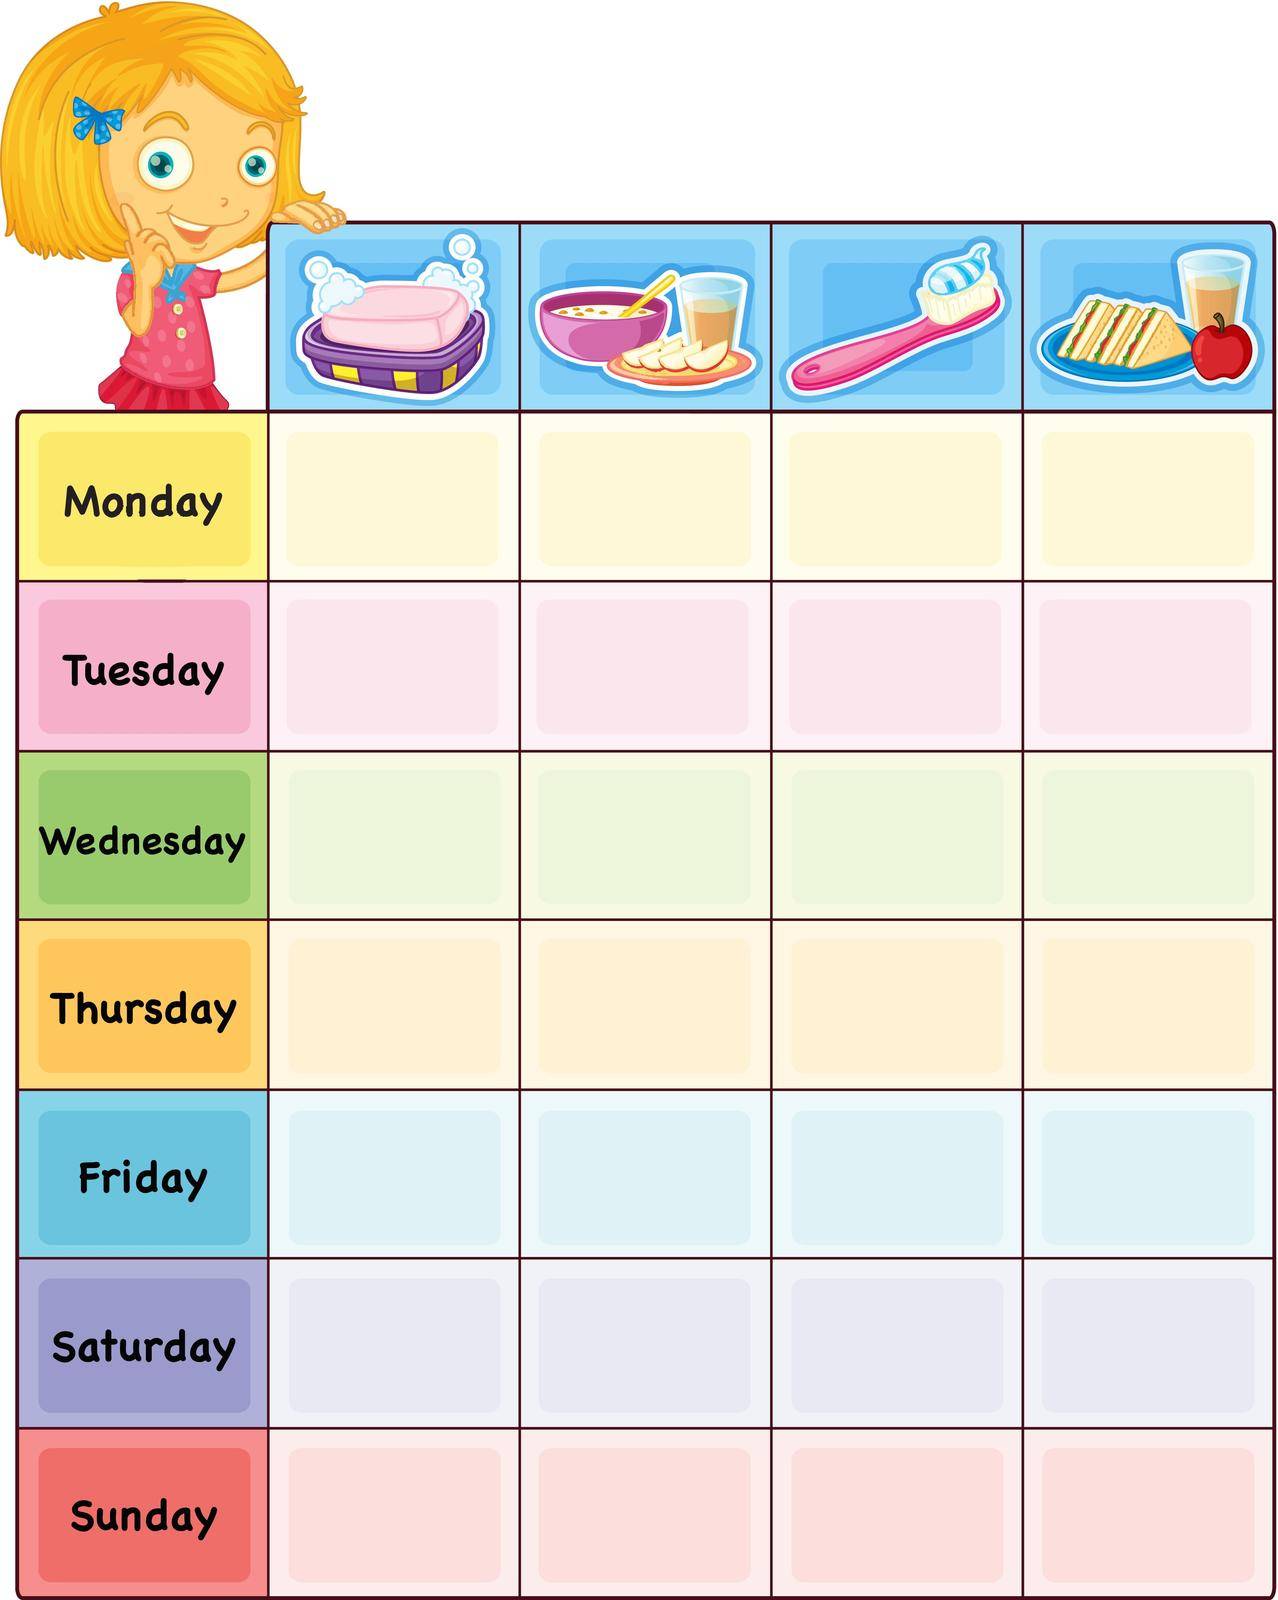 Illustration of a daily routine chart